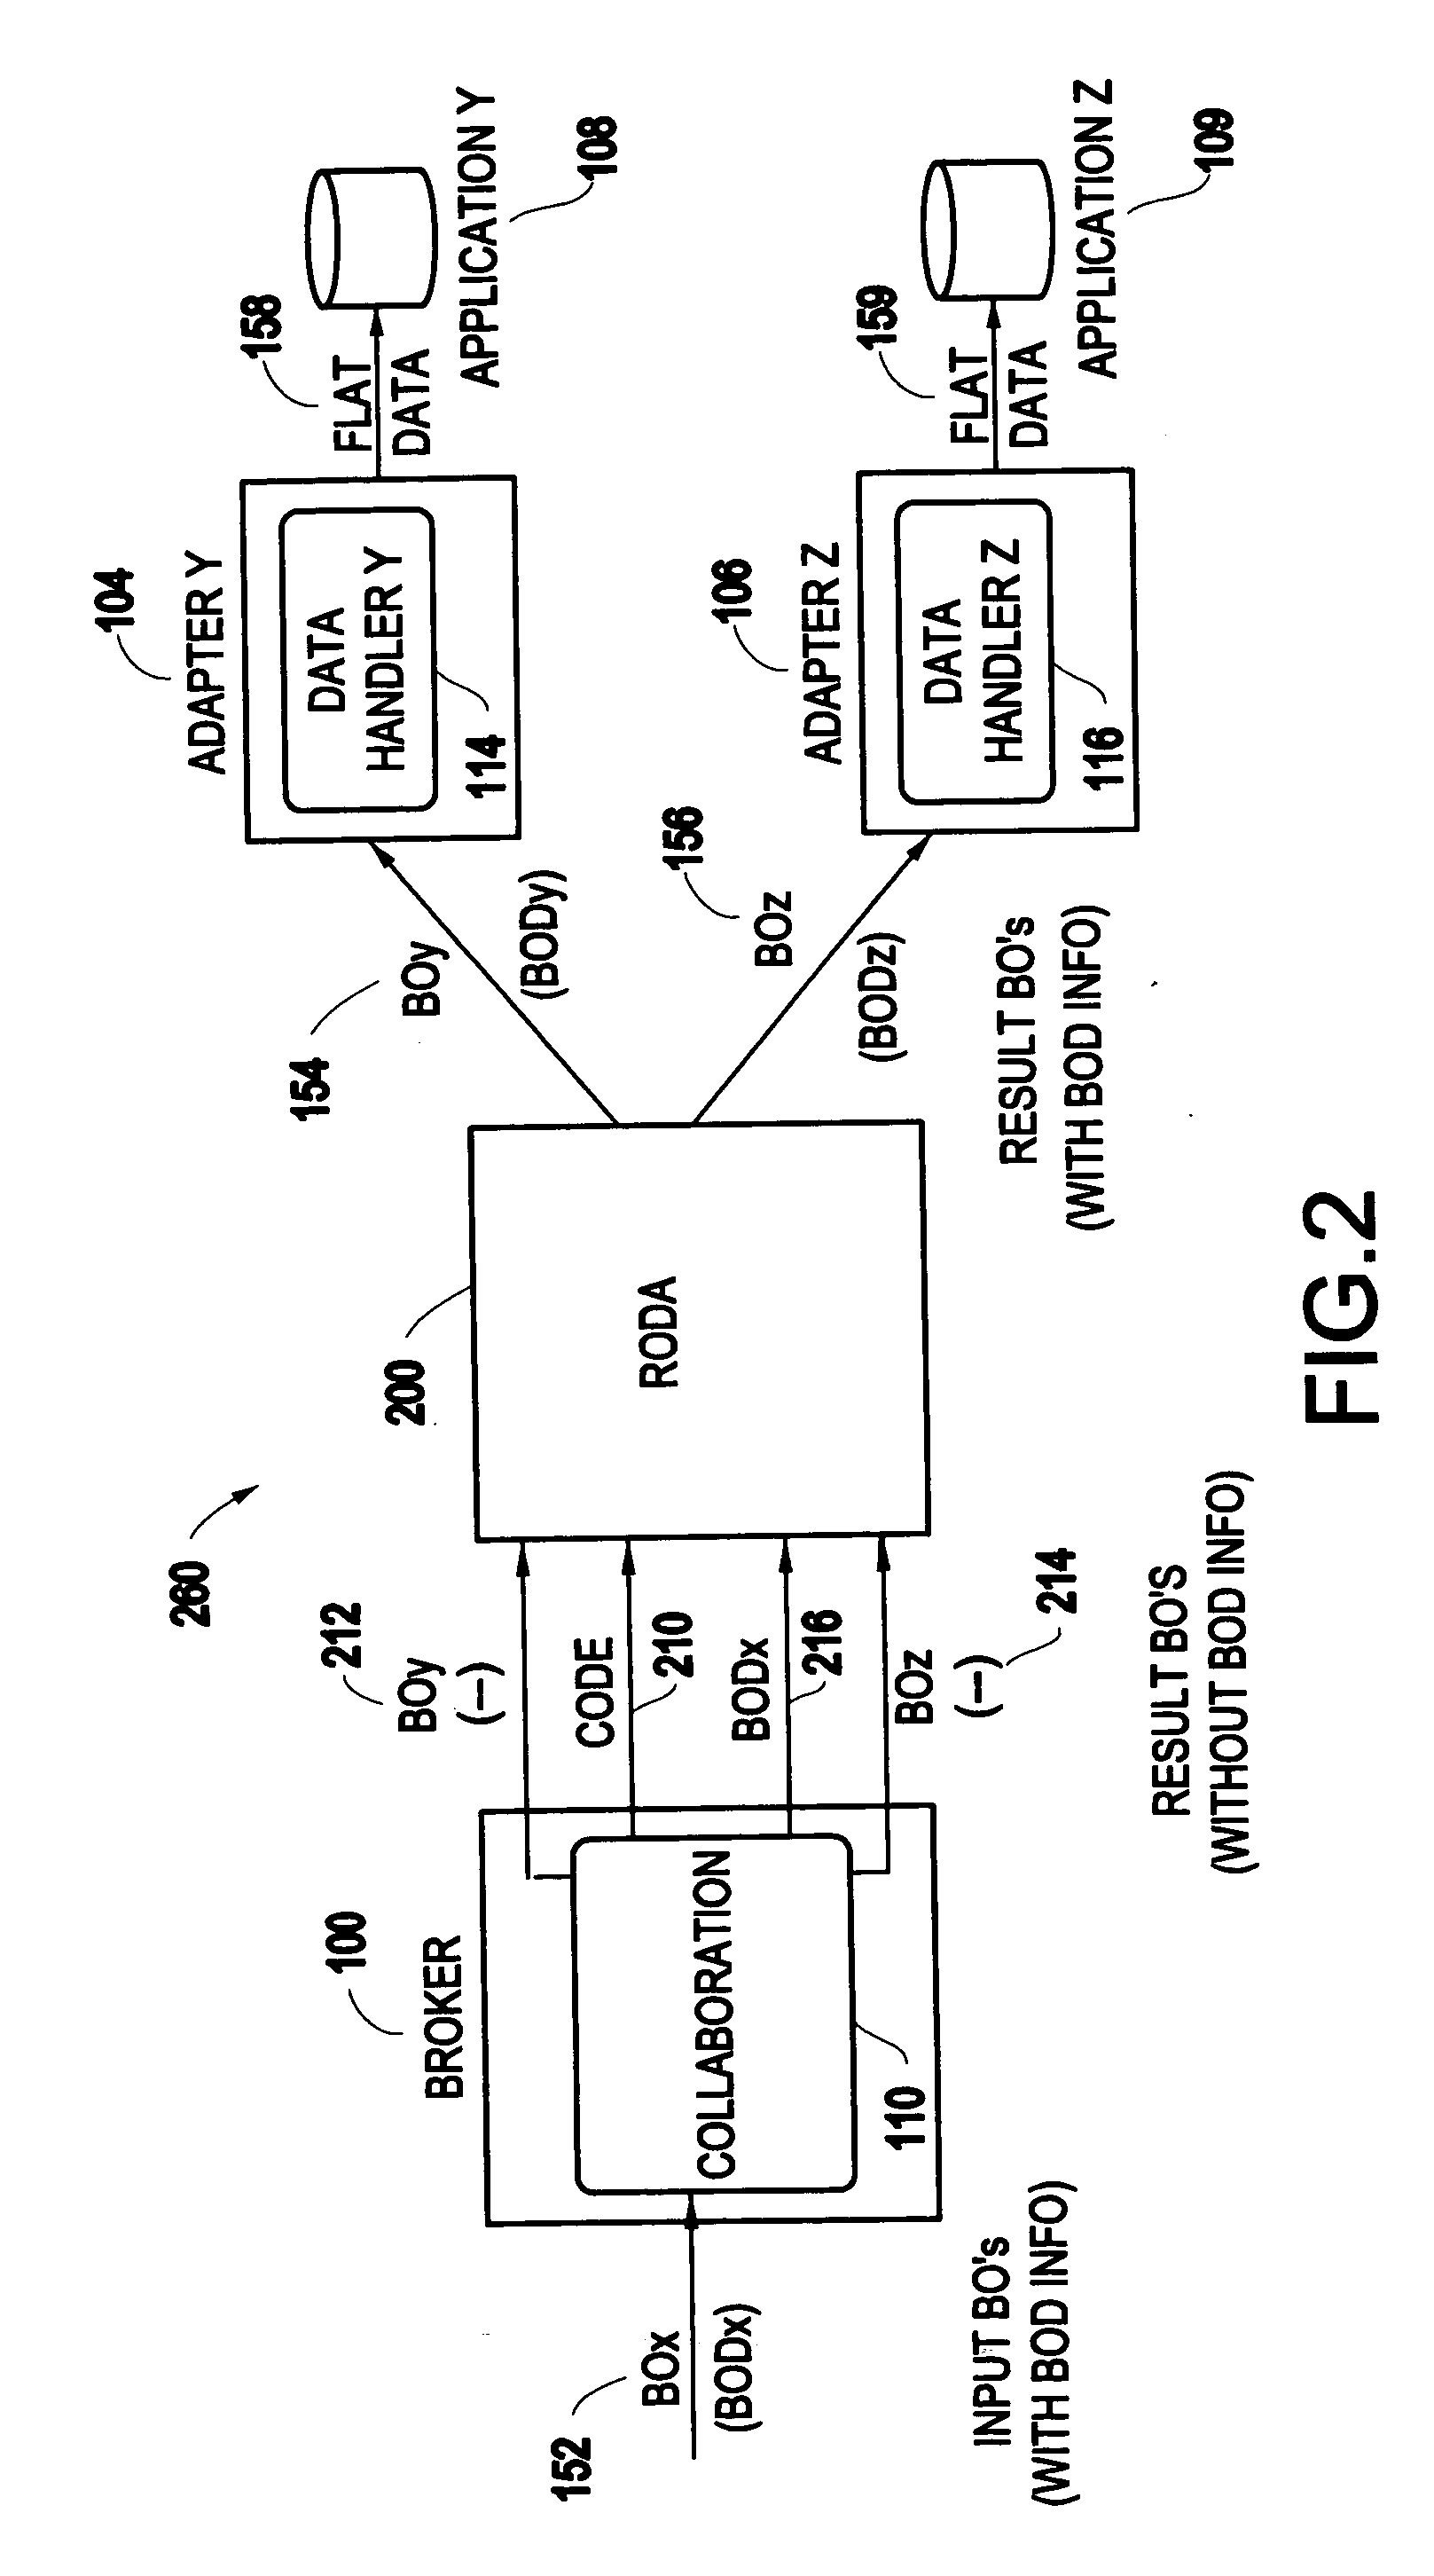 System and method for business object discovery